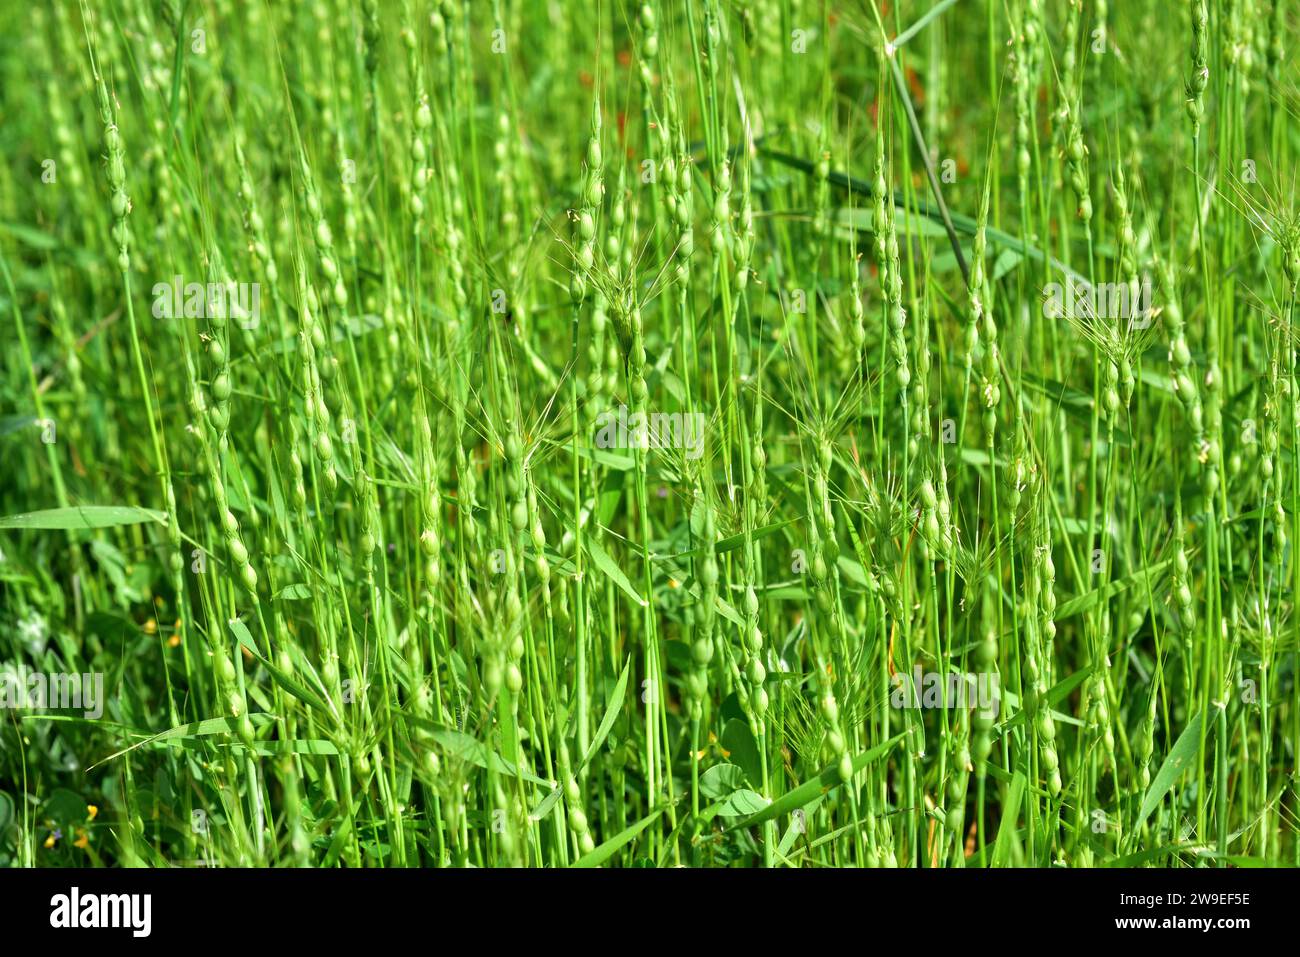 Belly-shaped hard grass or swollen goatgrass (Aegilops ventricosa, Gastropyrum ventricosum or Triticum ventricosum) is an annual herb native to southw Stock Photo